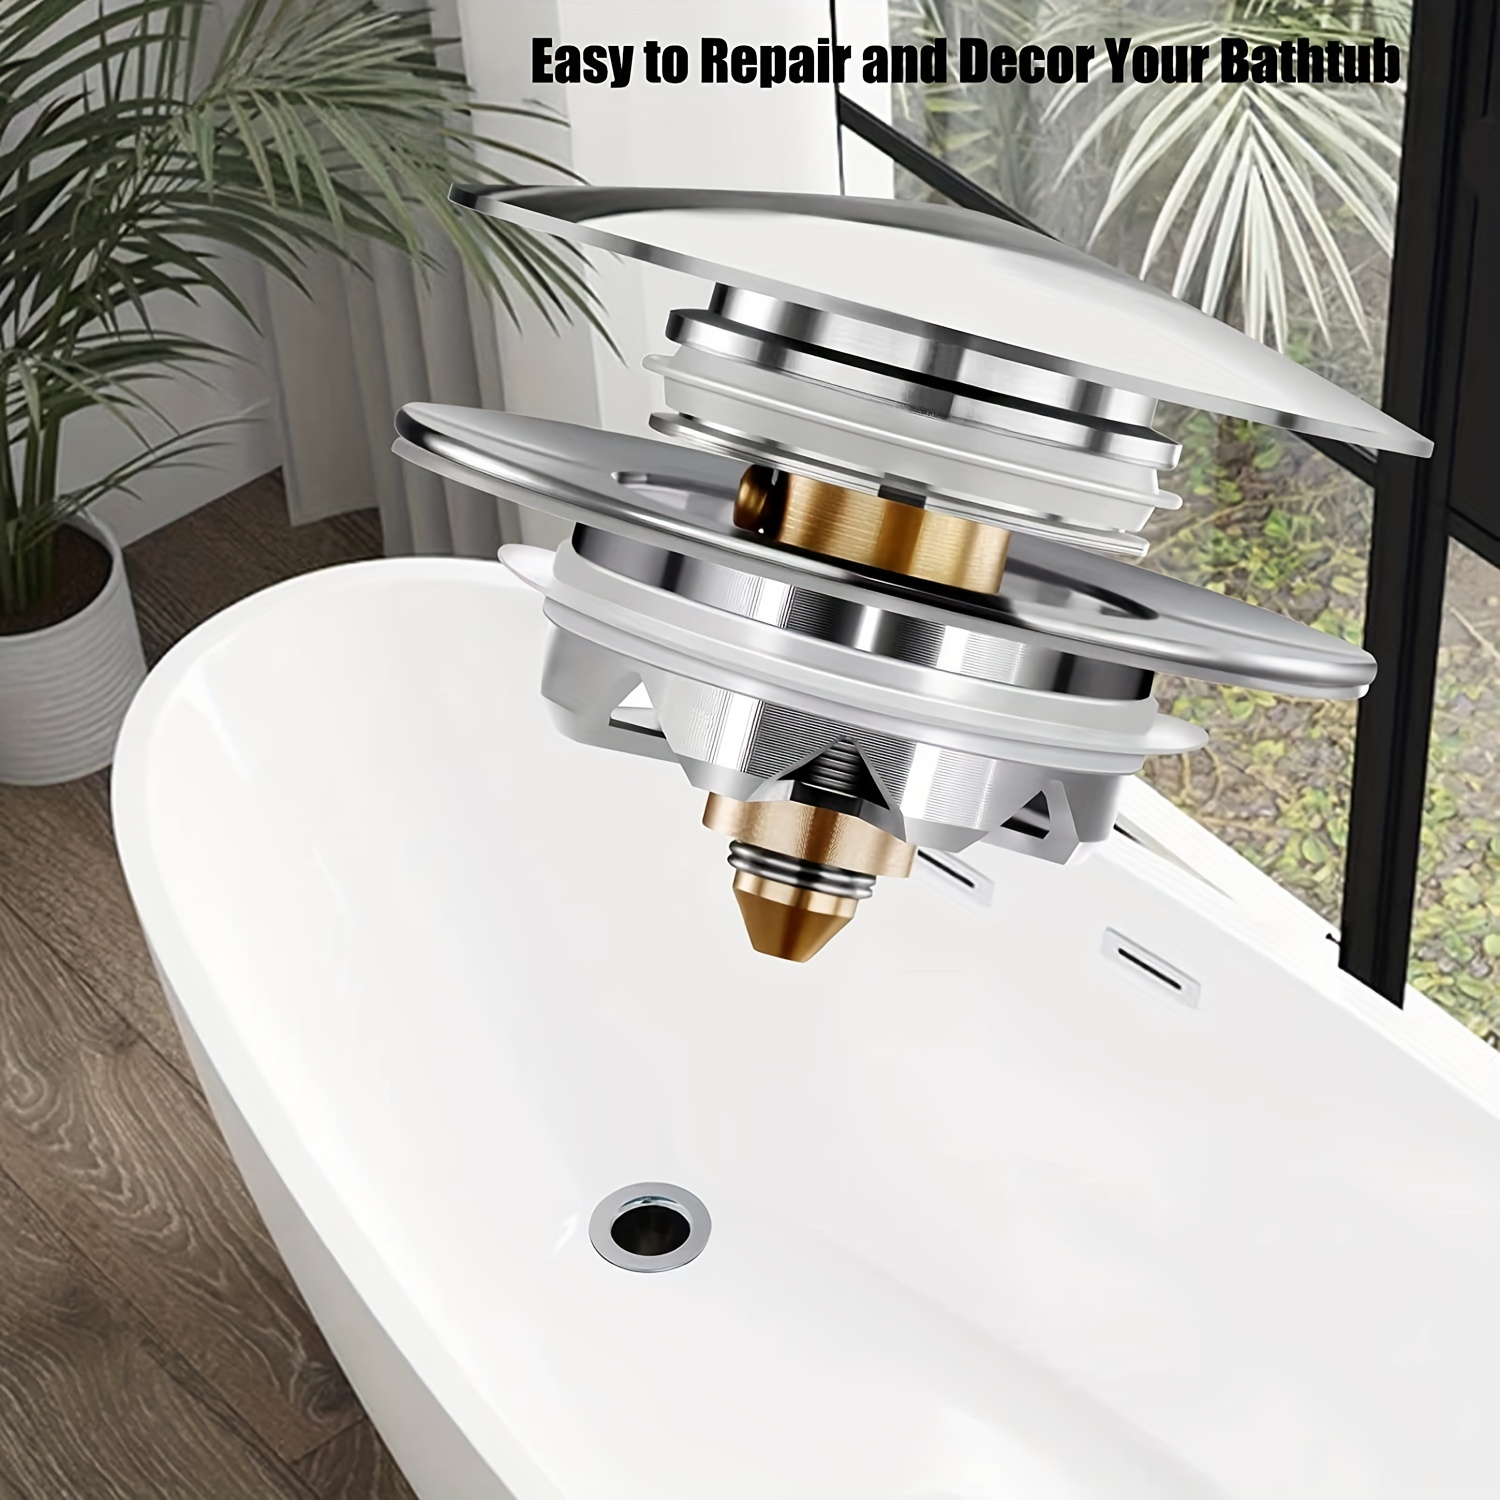 Universal Bathtub Stopper With Hair Catcher Upgraded Bathroom